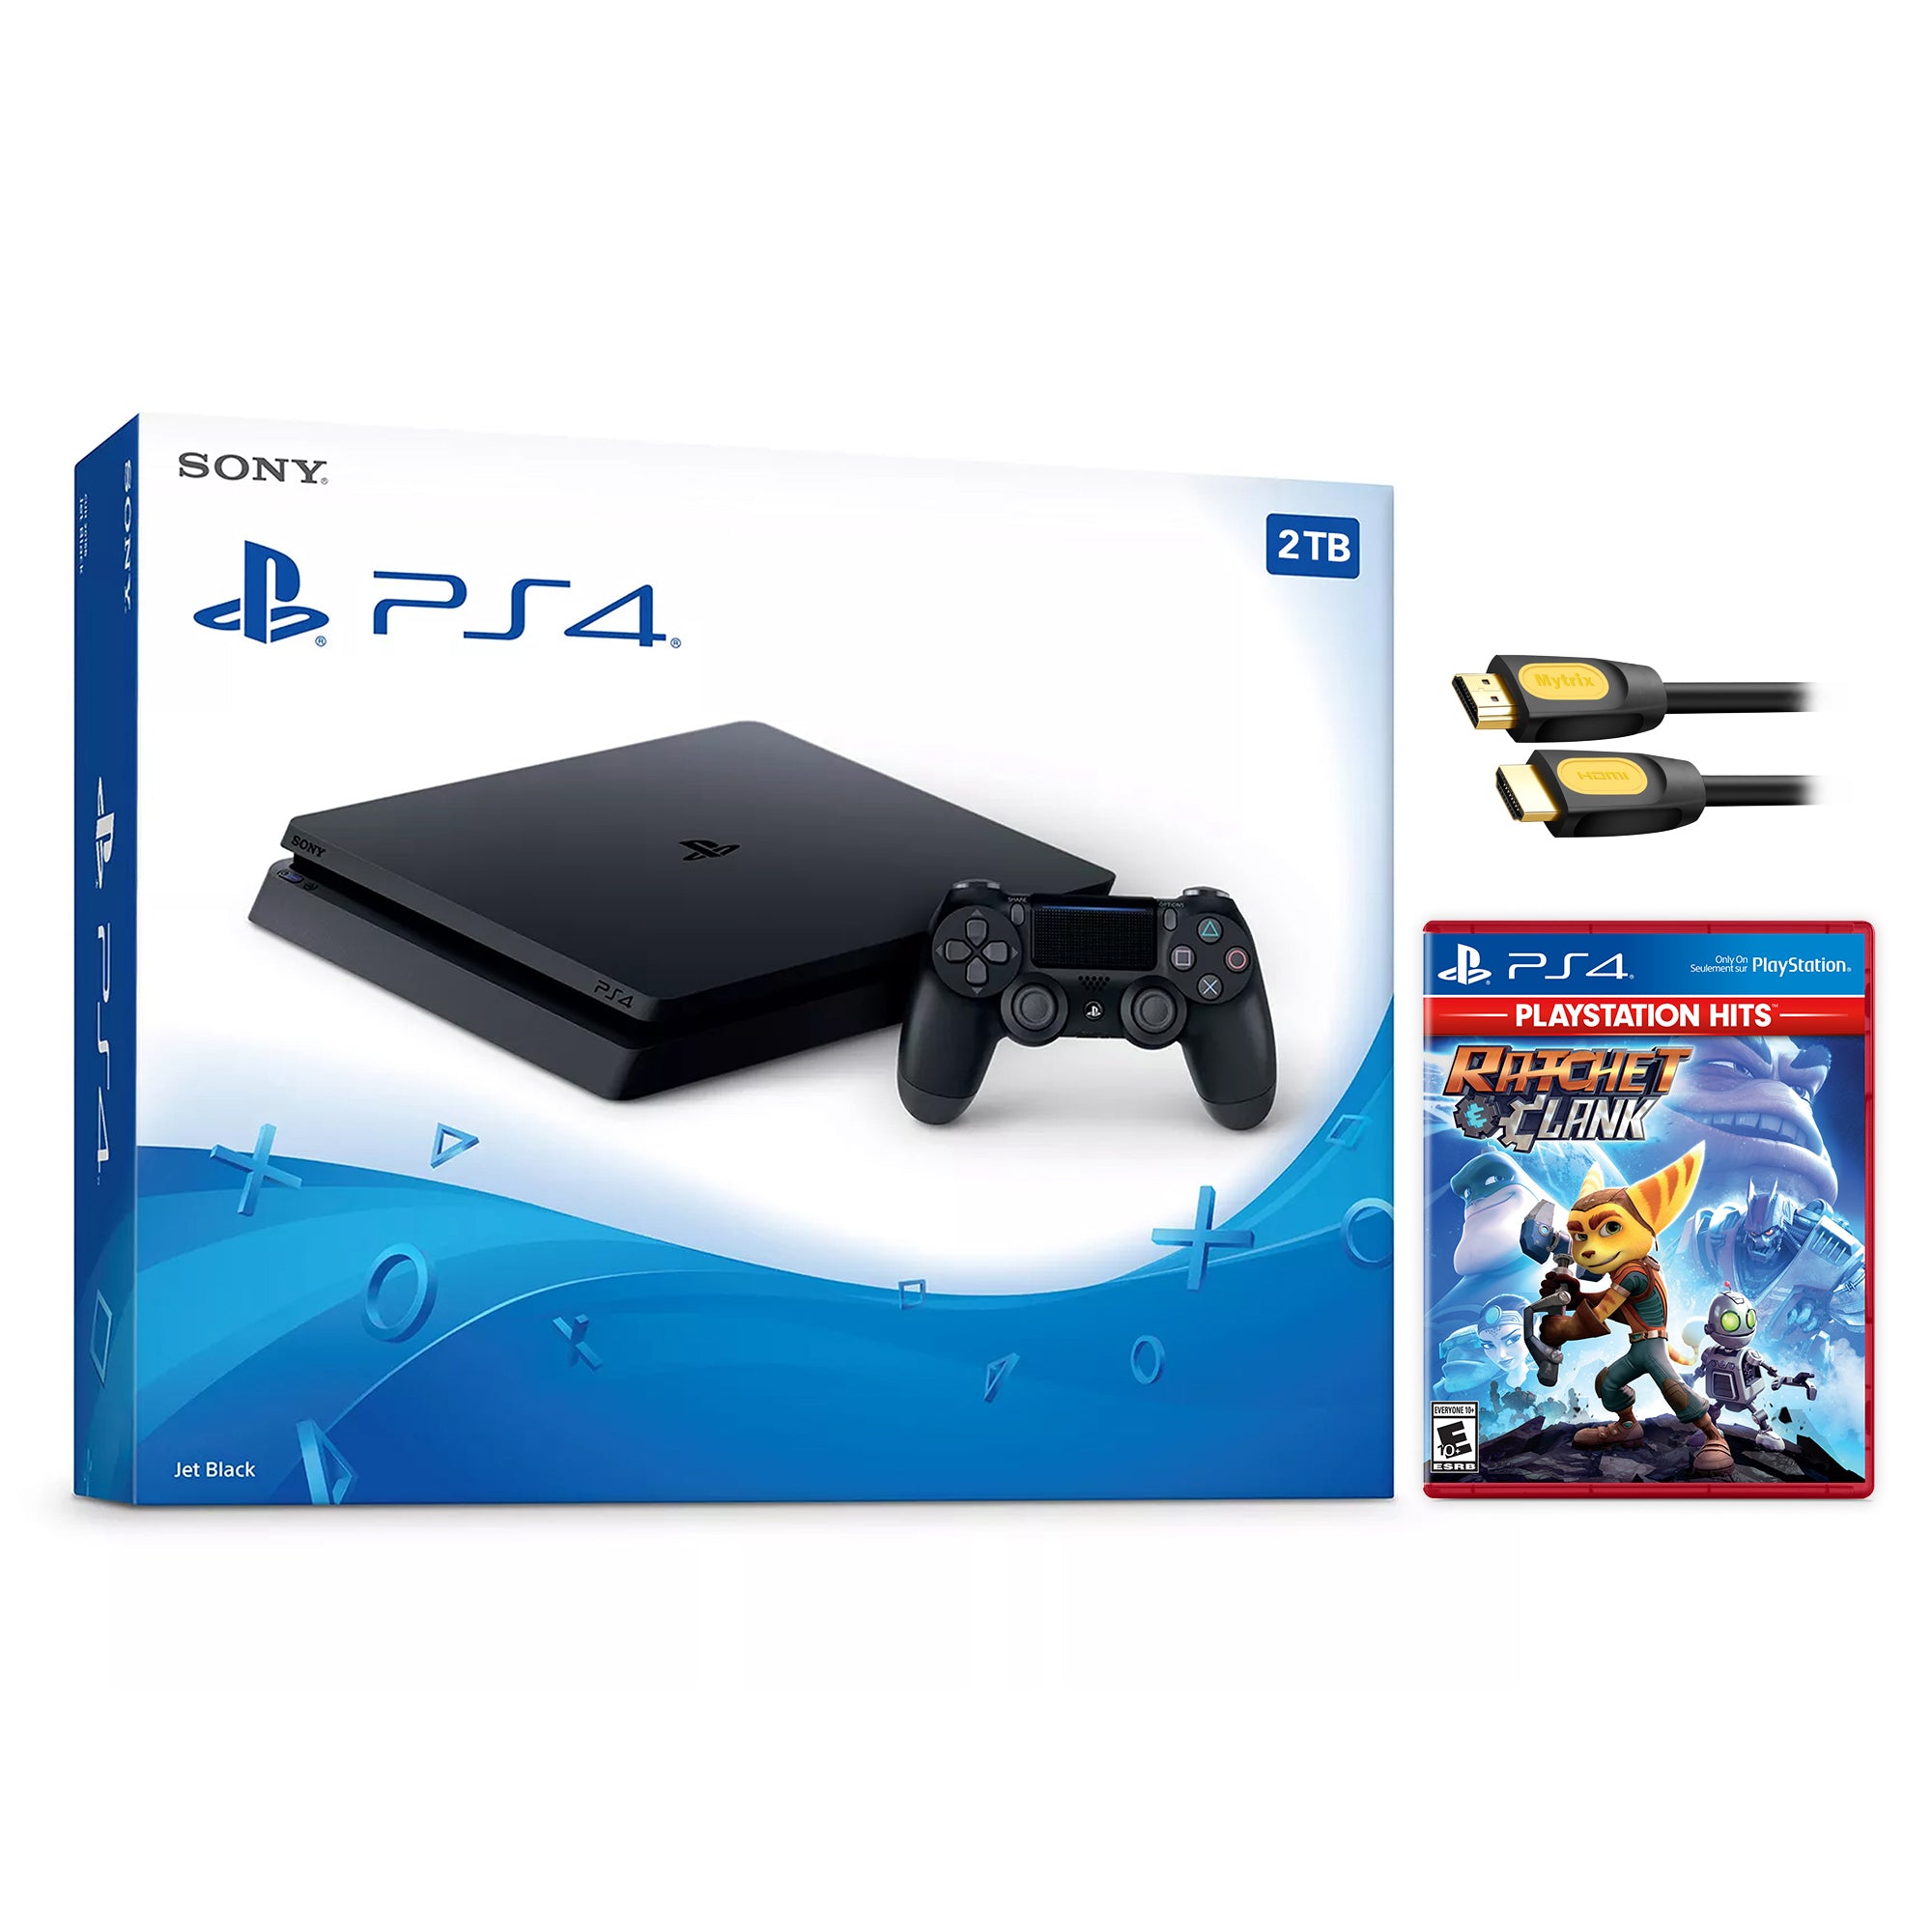 Sony PlayStation 4 Slim Storage Upgrade 2TB HDD PS4 Gaming Console, Jet Black, with Mytrix High Speed HDMI - Enhanced PS4 with Large Capacity Internal Hard Drive